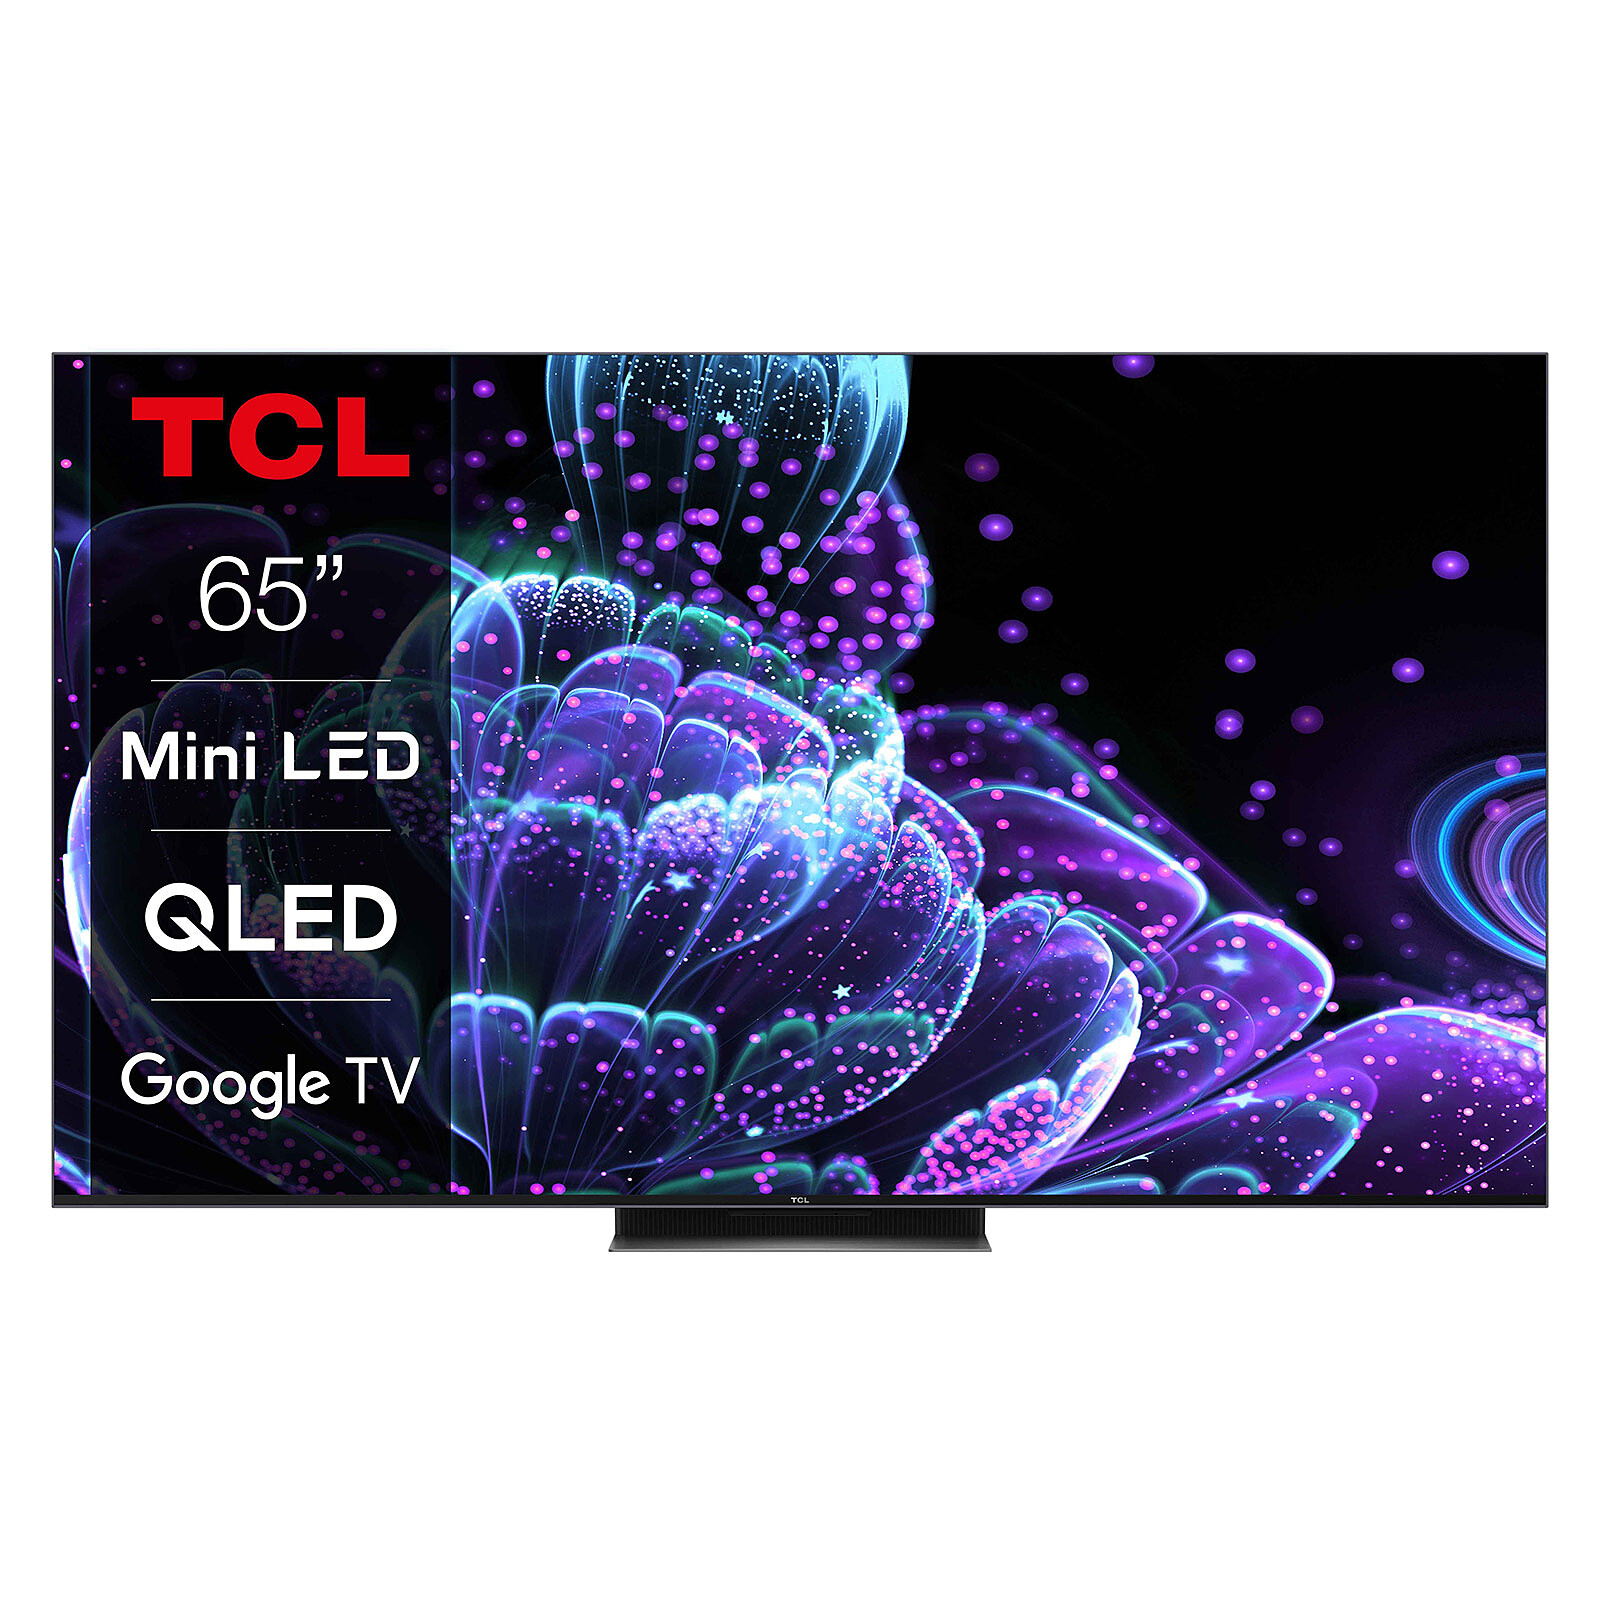 TCL 65C835 TV on LDLC | Holy Moley